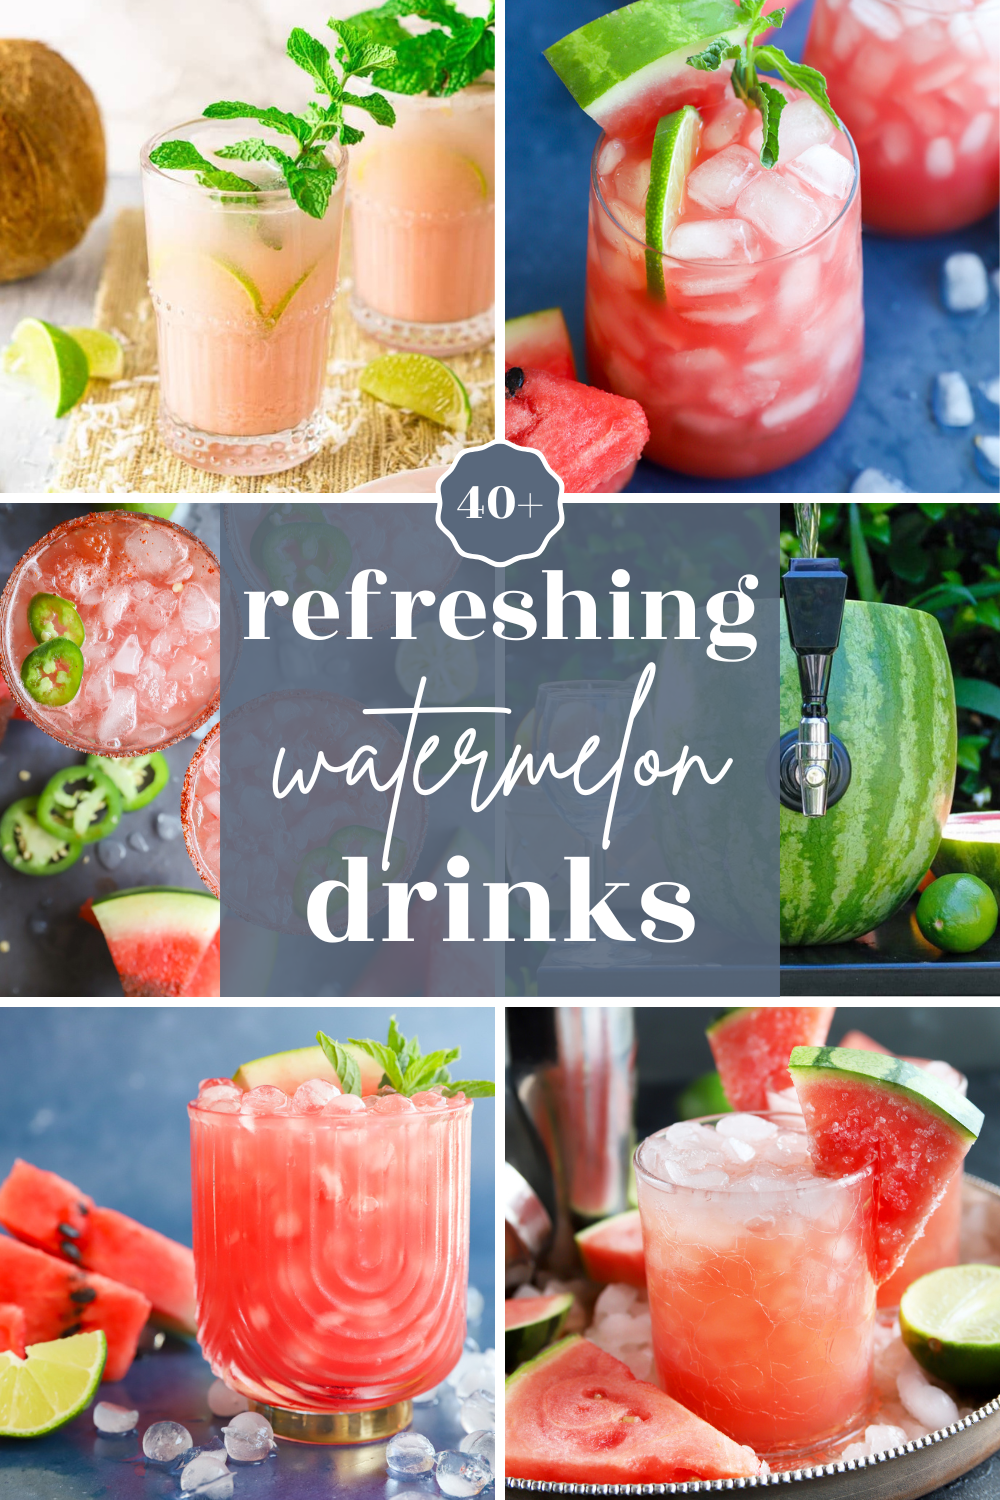 Watermelon cocktails and watermelon drinks pinterest image